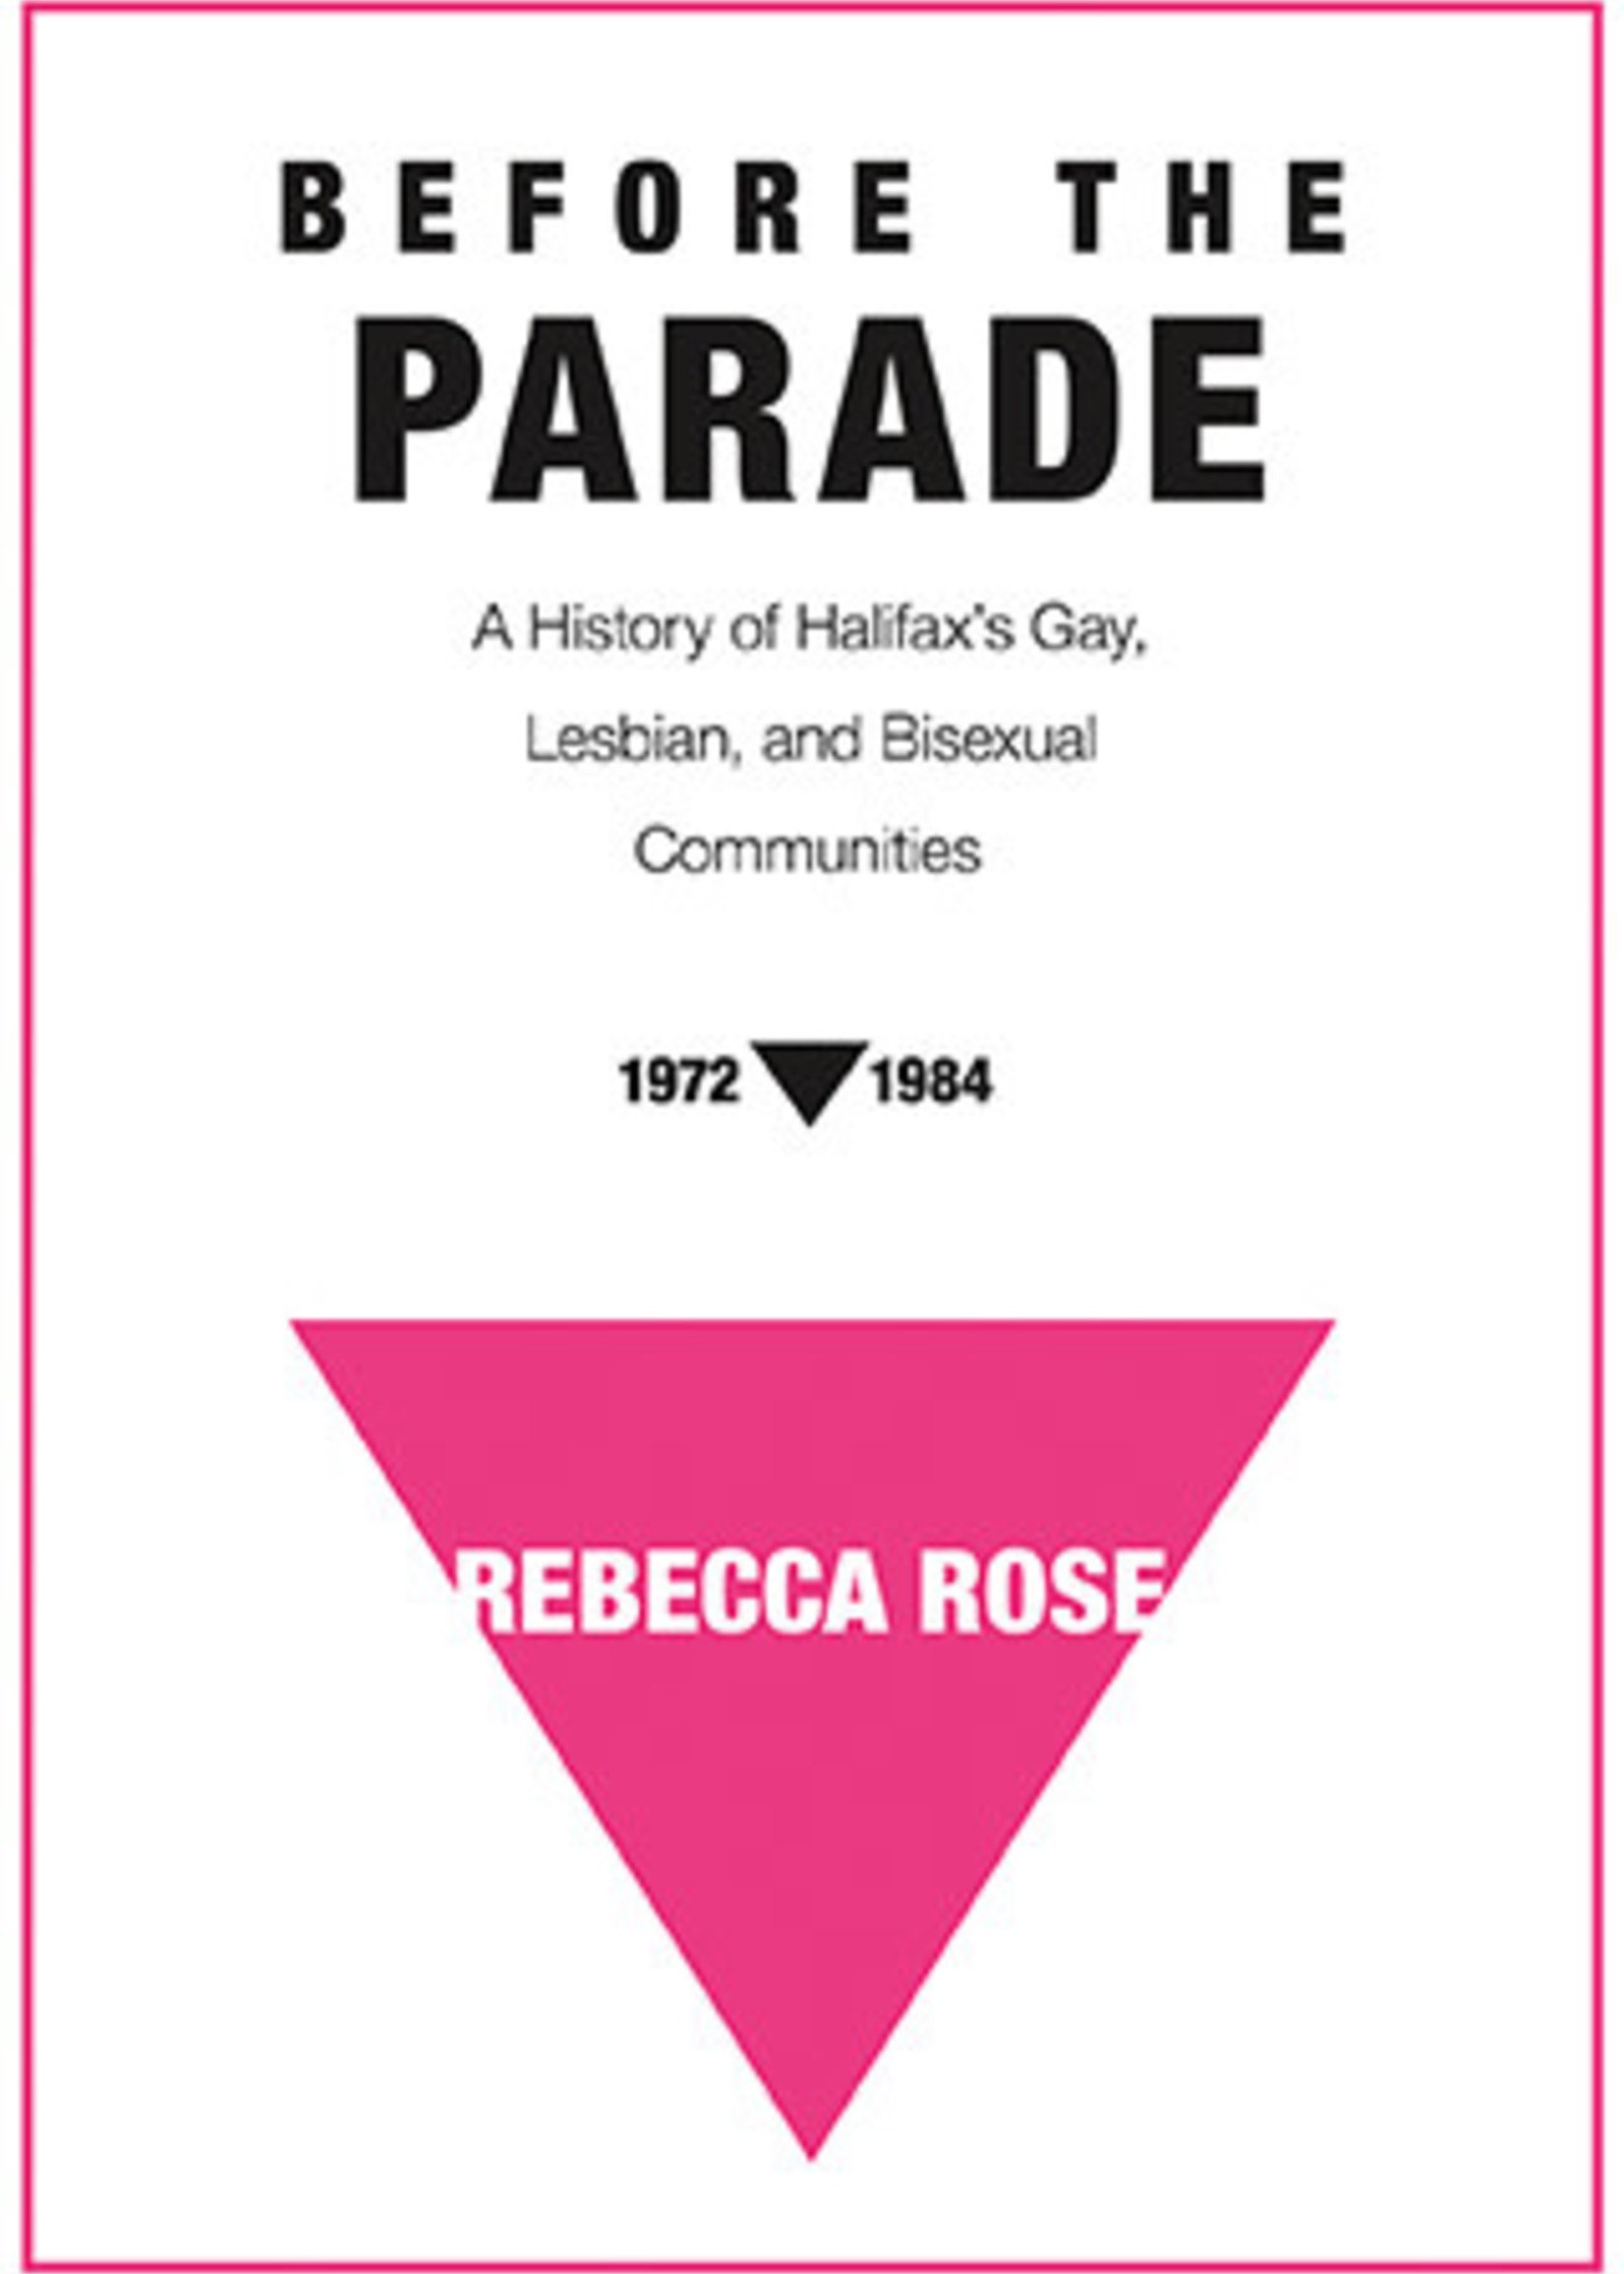 Before the Parade: A History of Halifax's Gay, Lesbian, and Bisexual Communities, 1972-1984 by Rebecca Rose